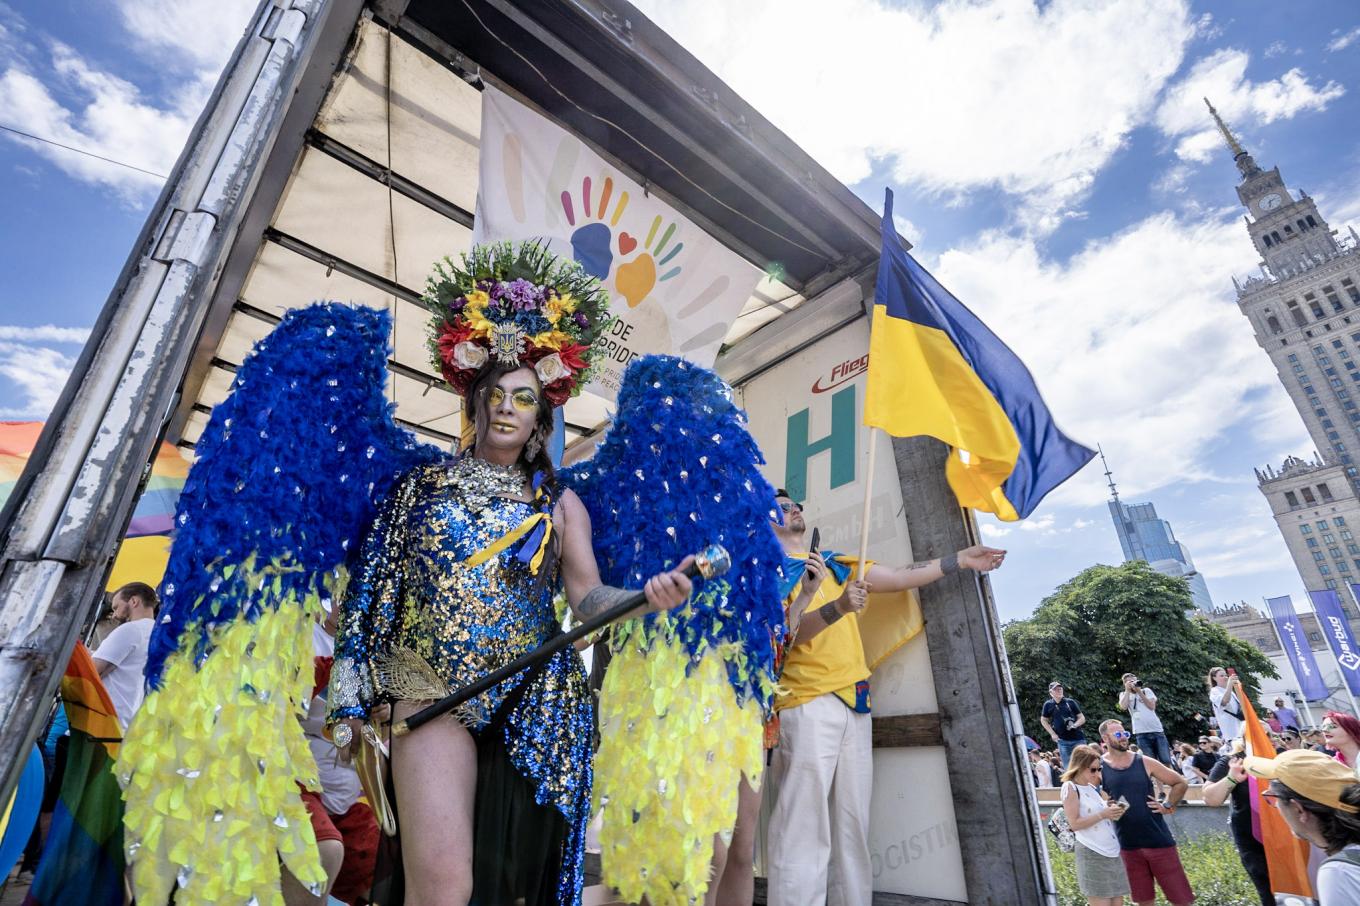 Drag queen Marlen Scandal salutes crowd from the Kyiv Pride float at joint Kyiv-Warsaw Pride